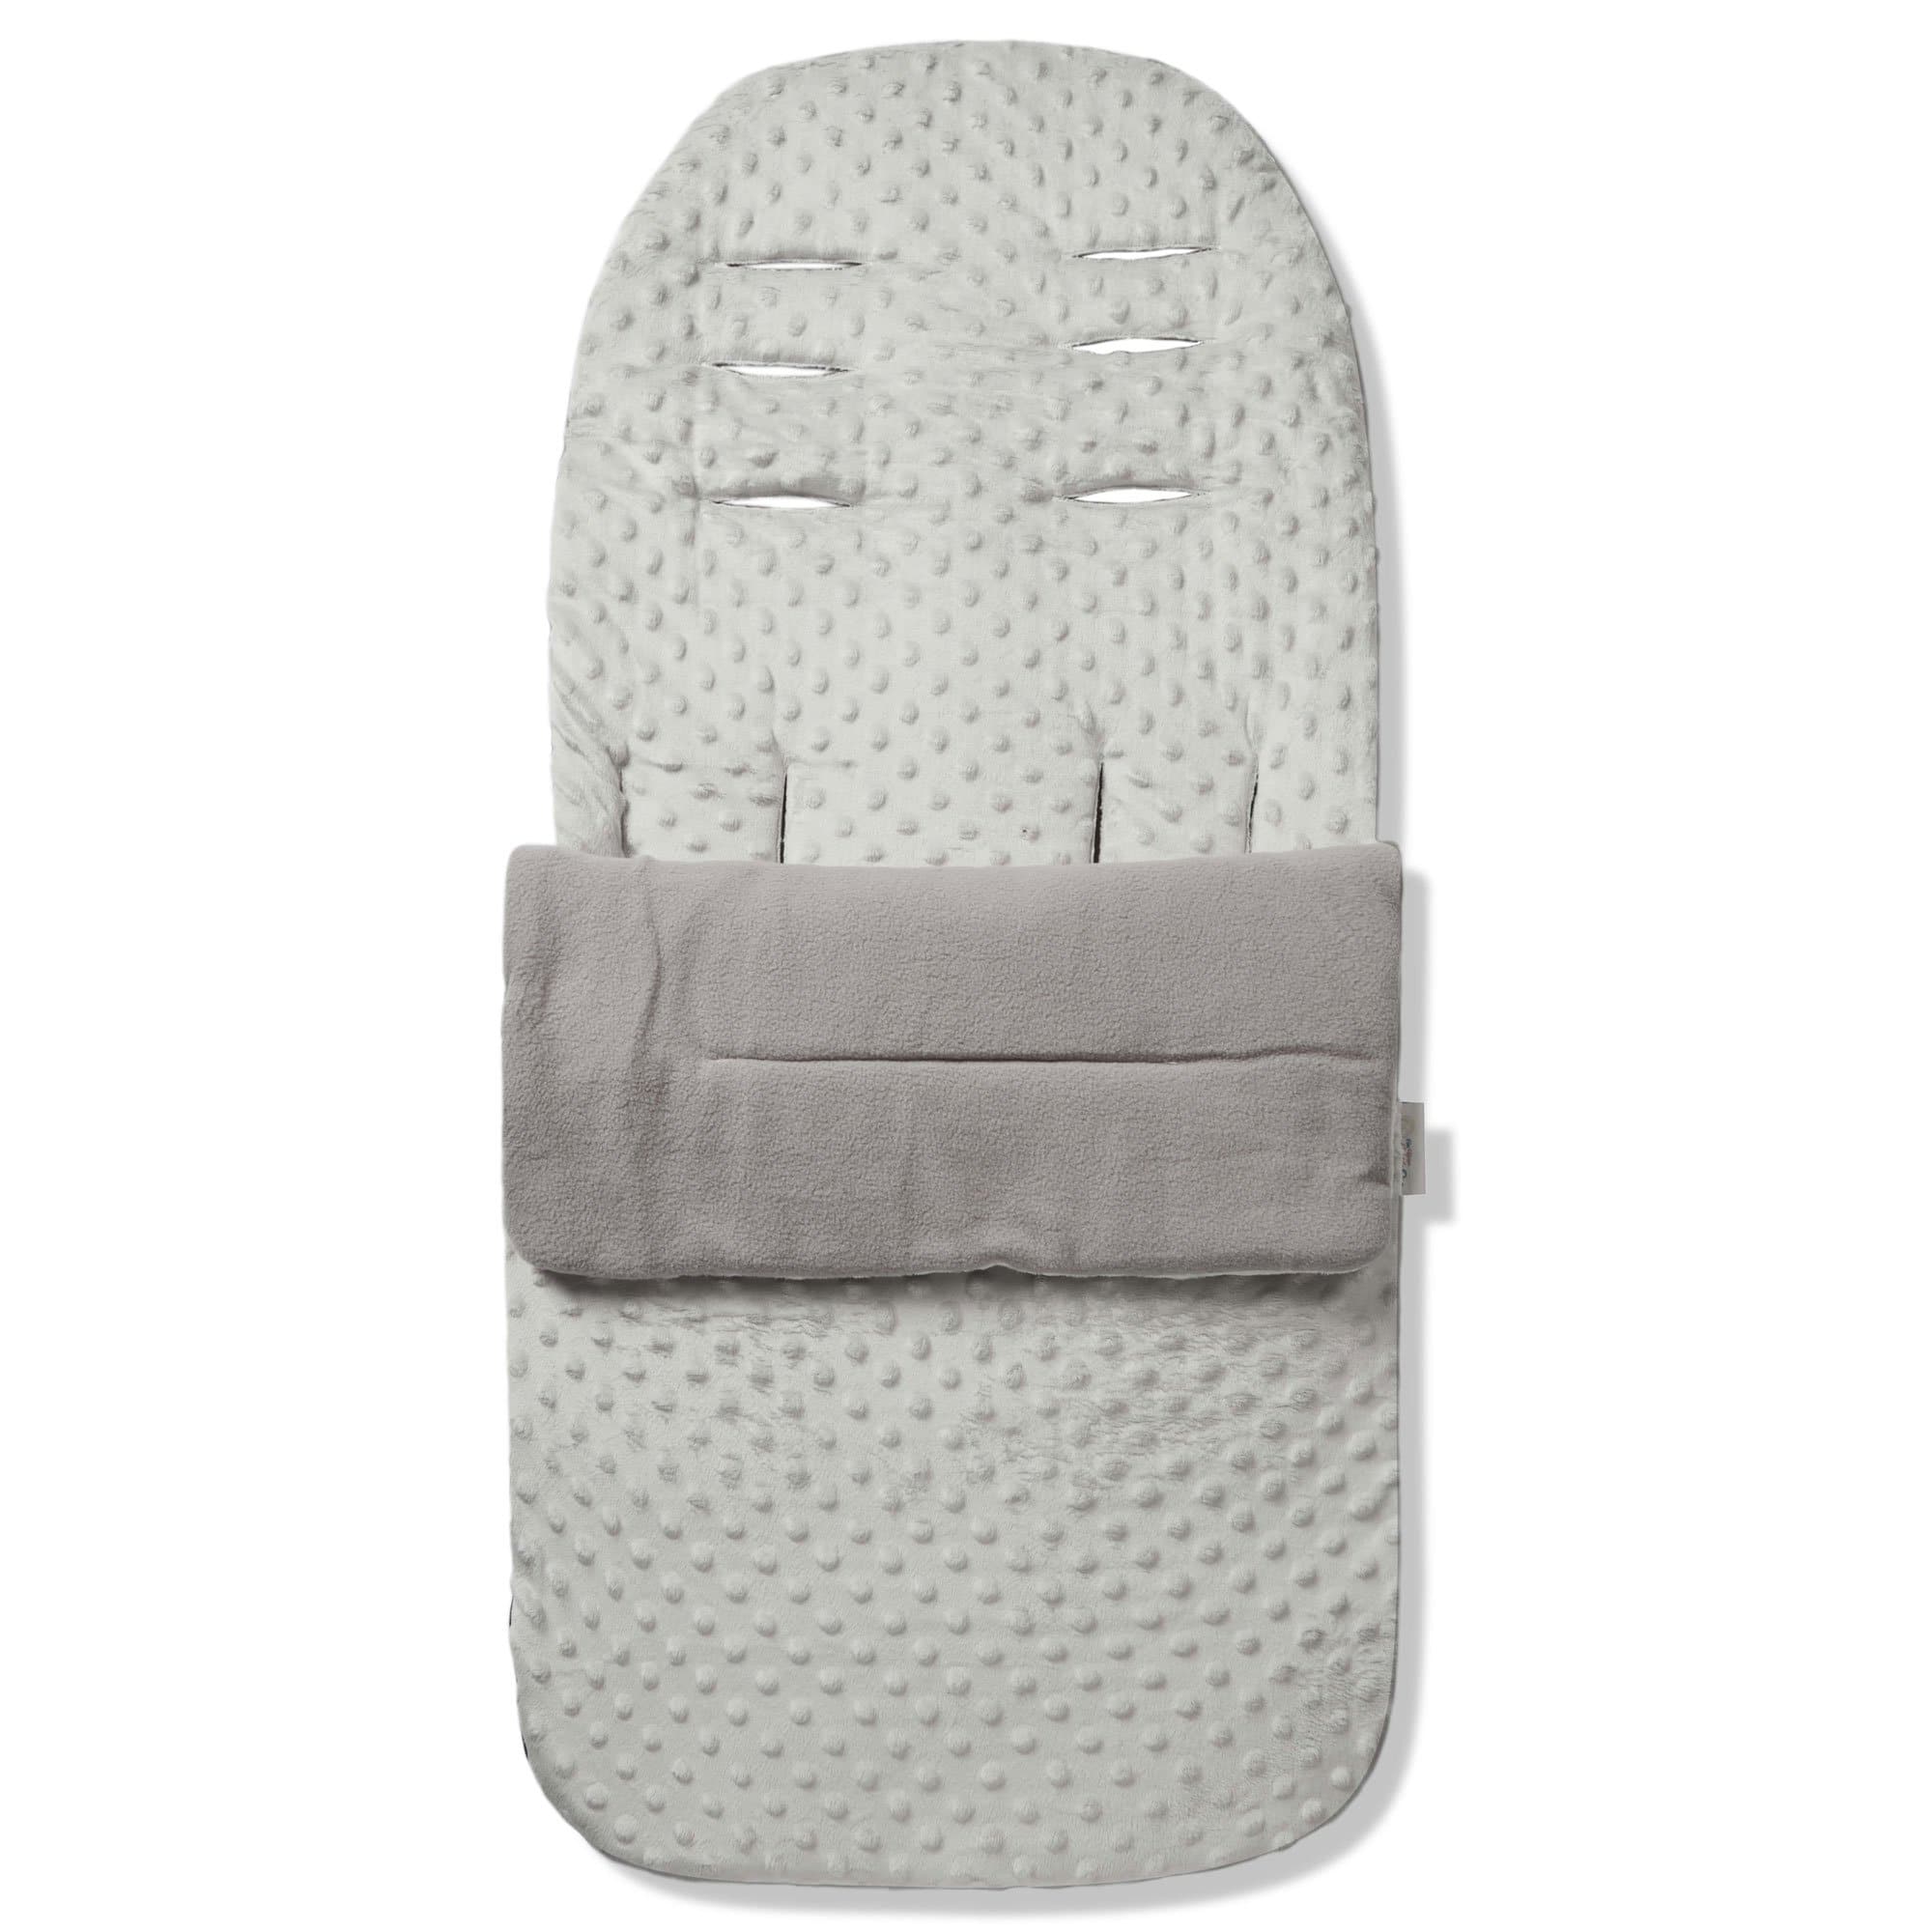 Dimple Footmuff / Cosy Toes Compatible with Mutsy - Grey / Fits All Models | For Your Little One